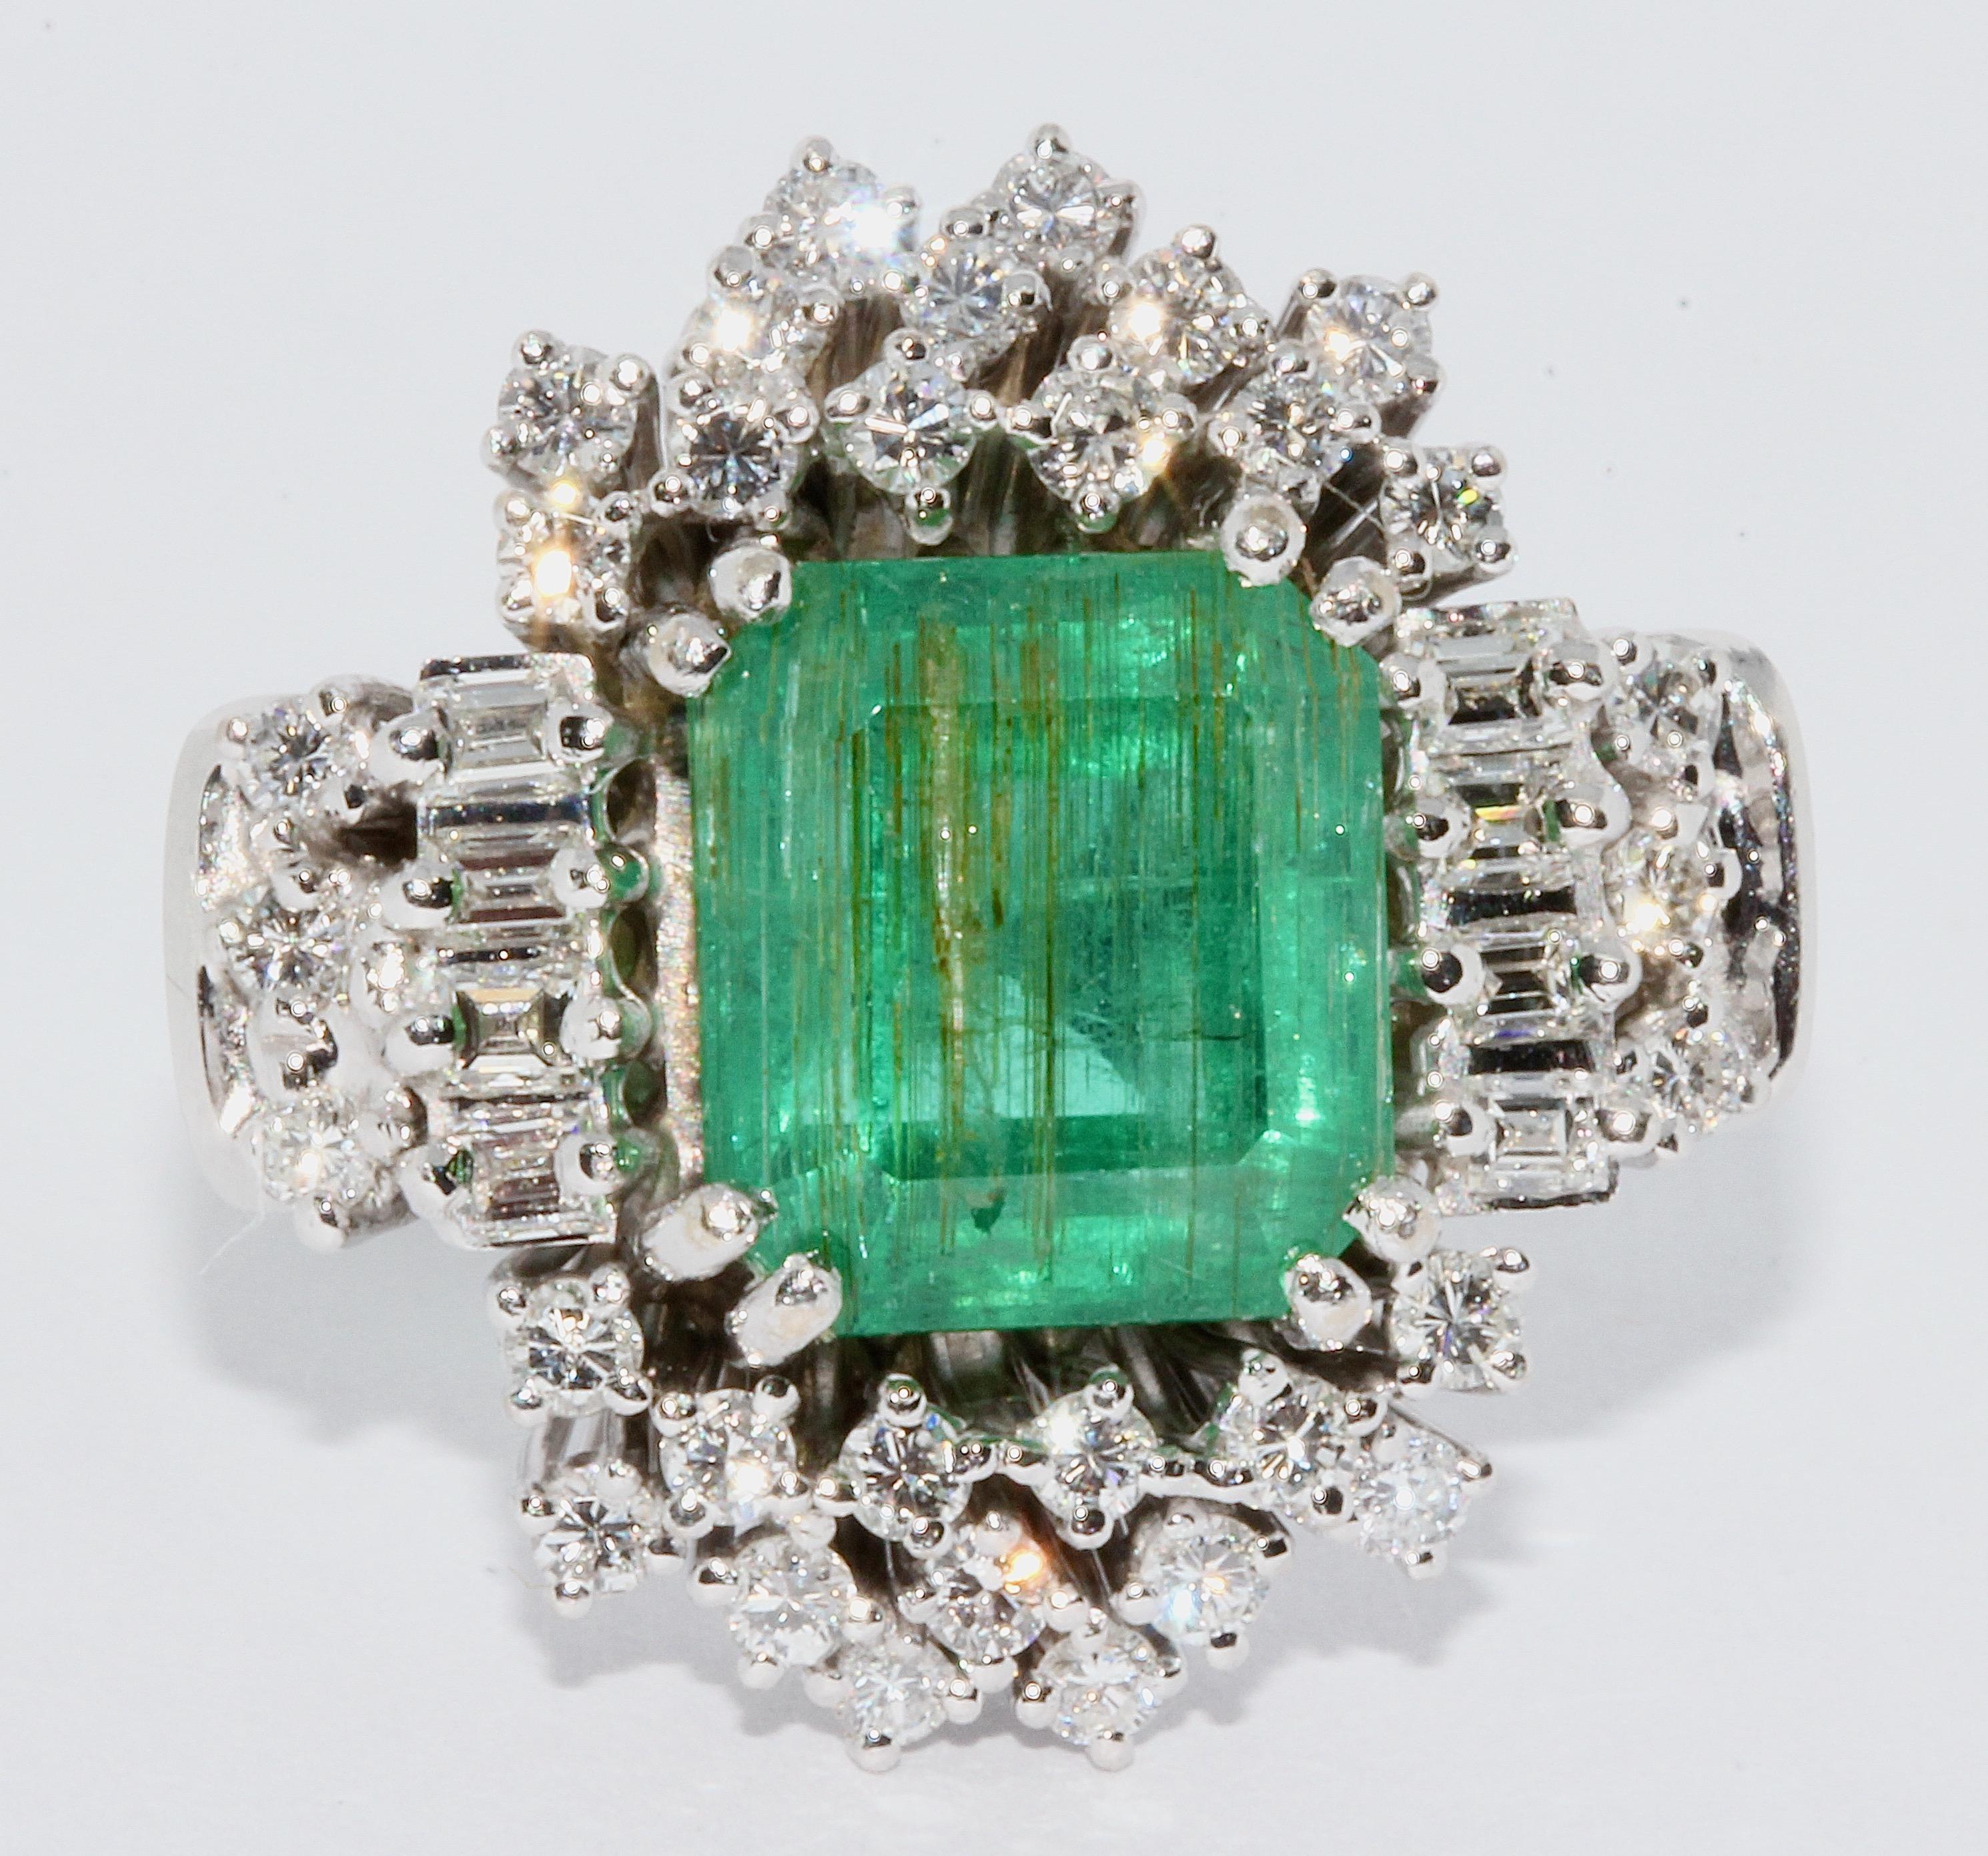 Magnificent 18k white gold ring with diamonds and large emerald of approximately 4.5 carats.

Diamond sparkling is natural and not digitally inserted.

We can adjust the ring size on request.

Including certificate of authenticity.